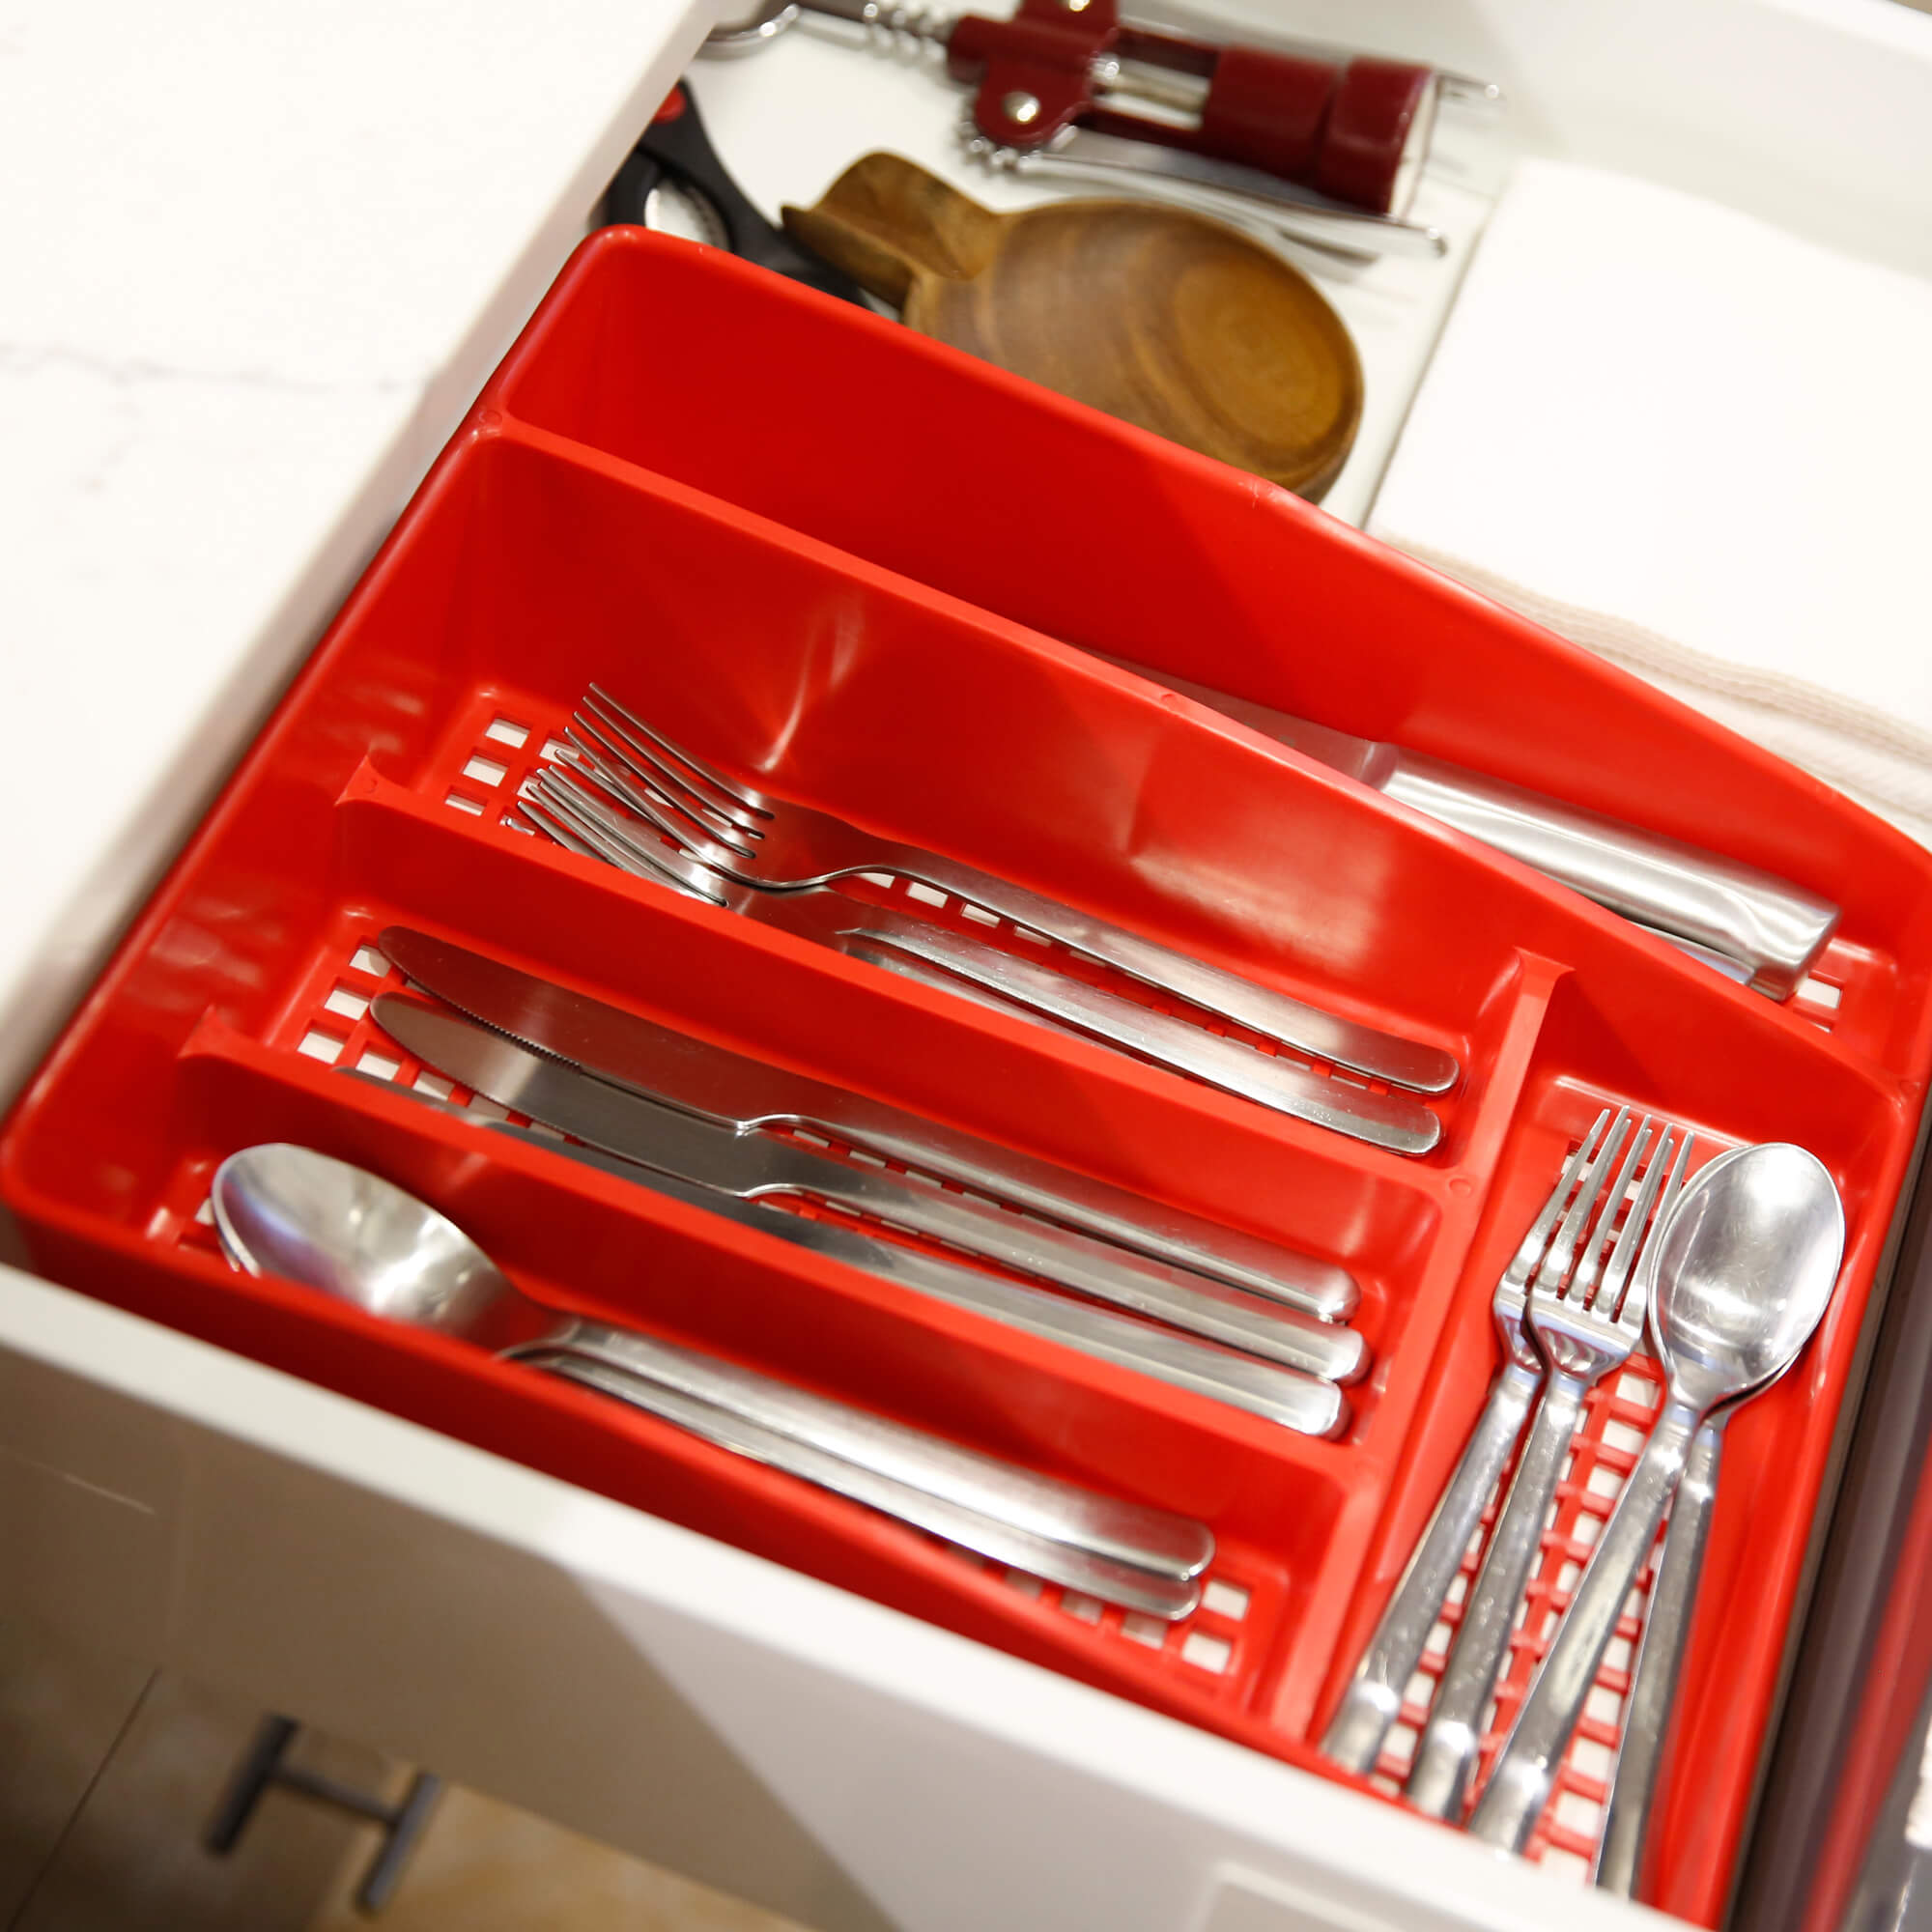 Large cutlery tray